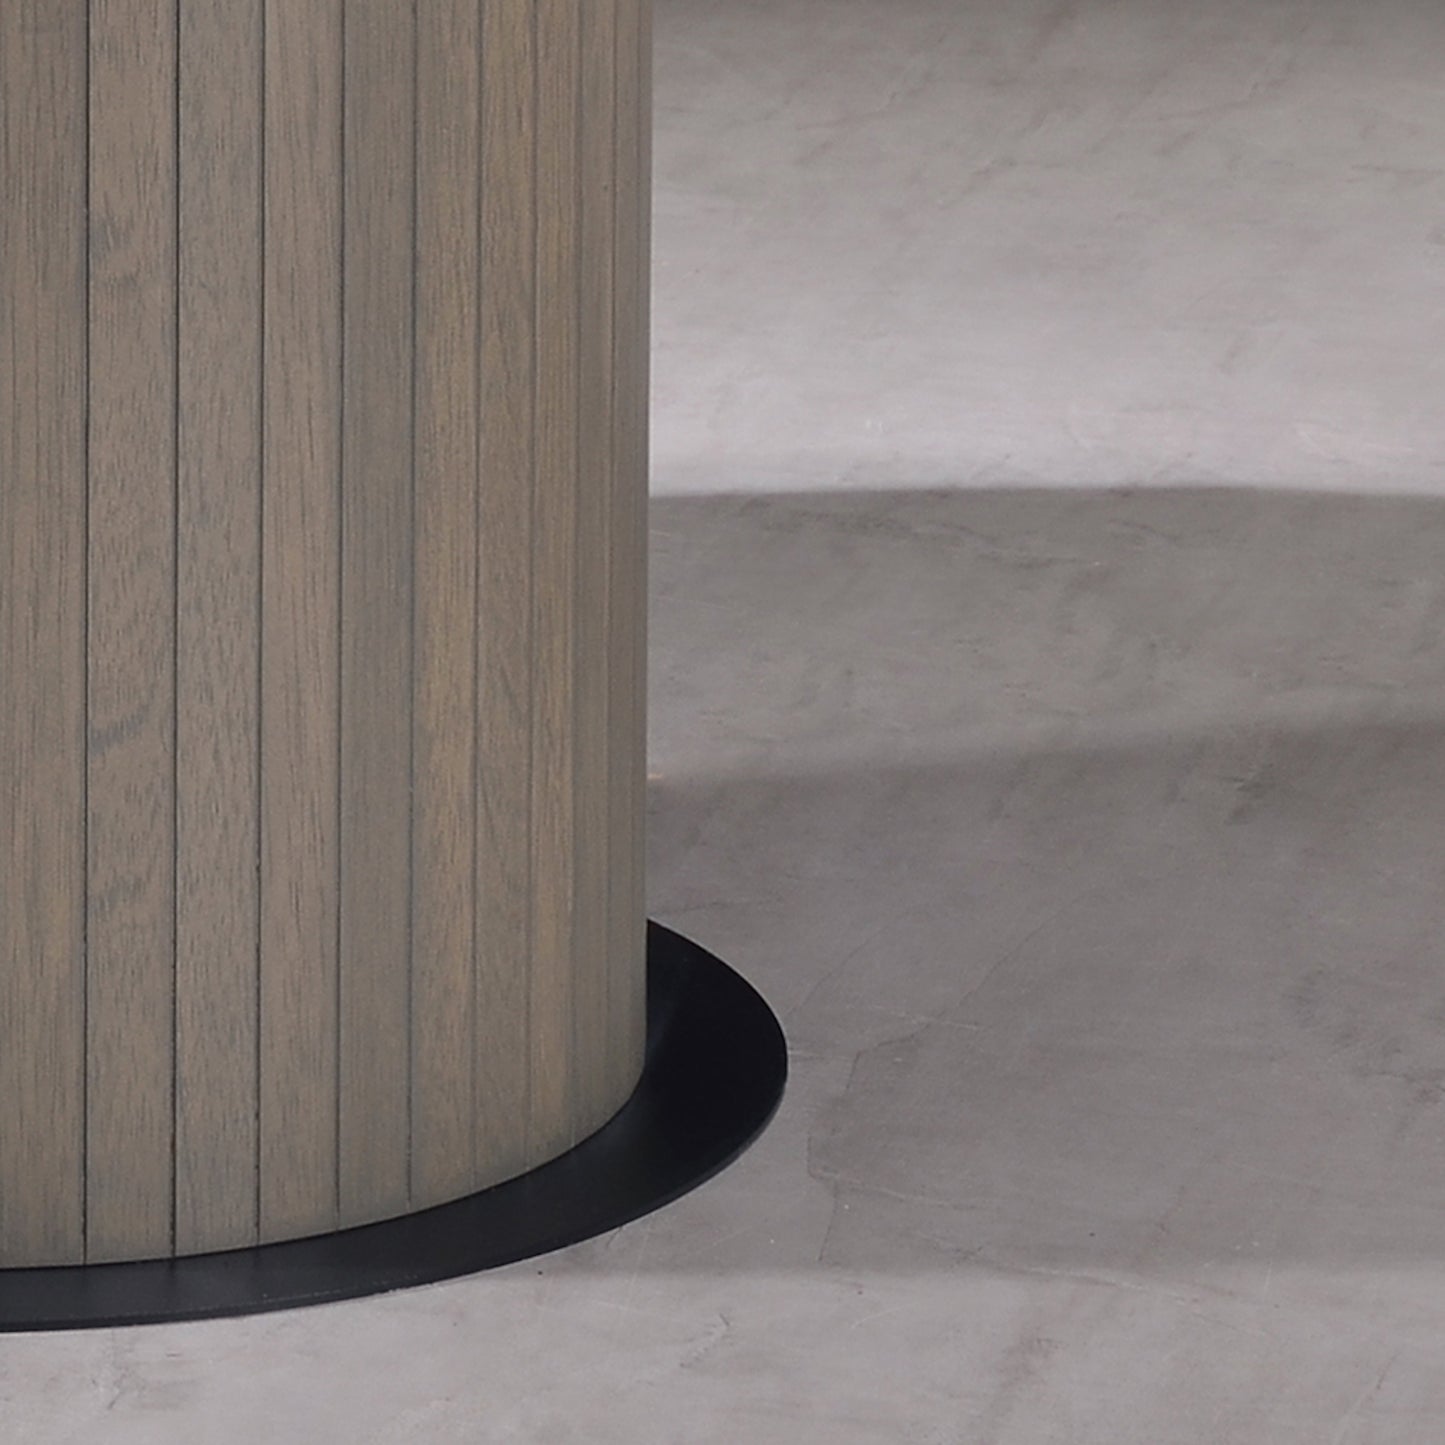 Criterion Eucla Dining Table 1500mm Round 20mm Laminated Marble Top with Lazy Susan KSK Slate Wood Veneer